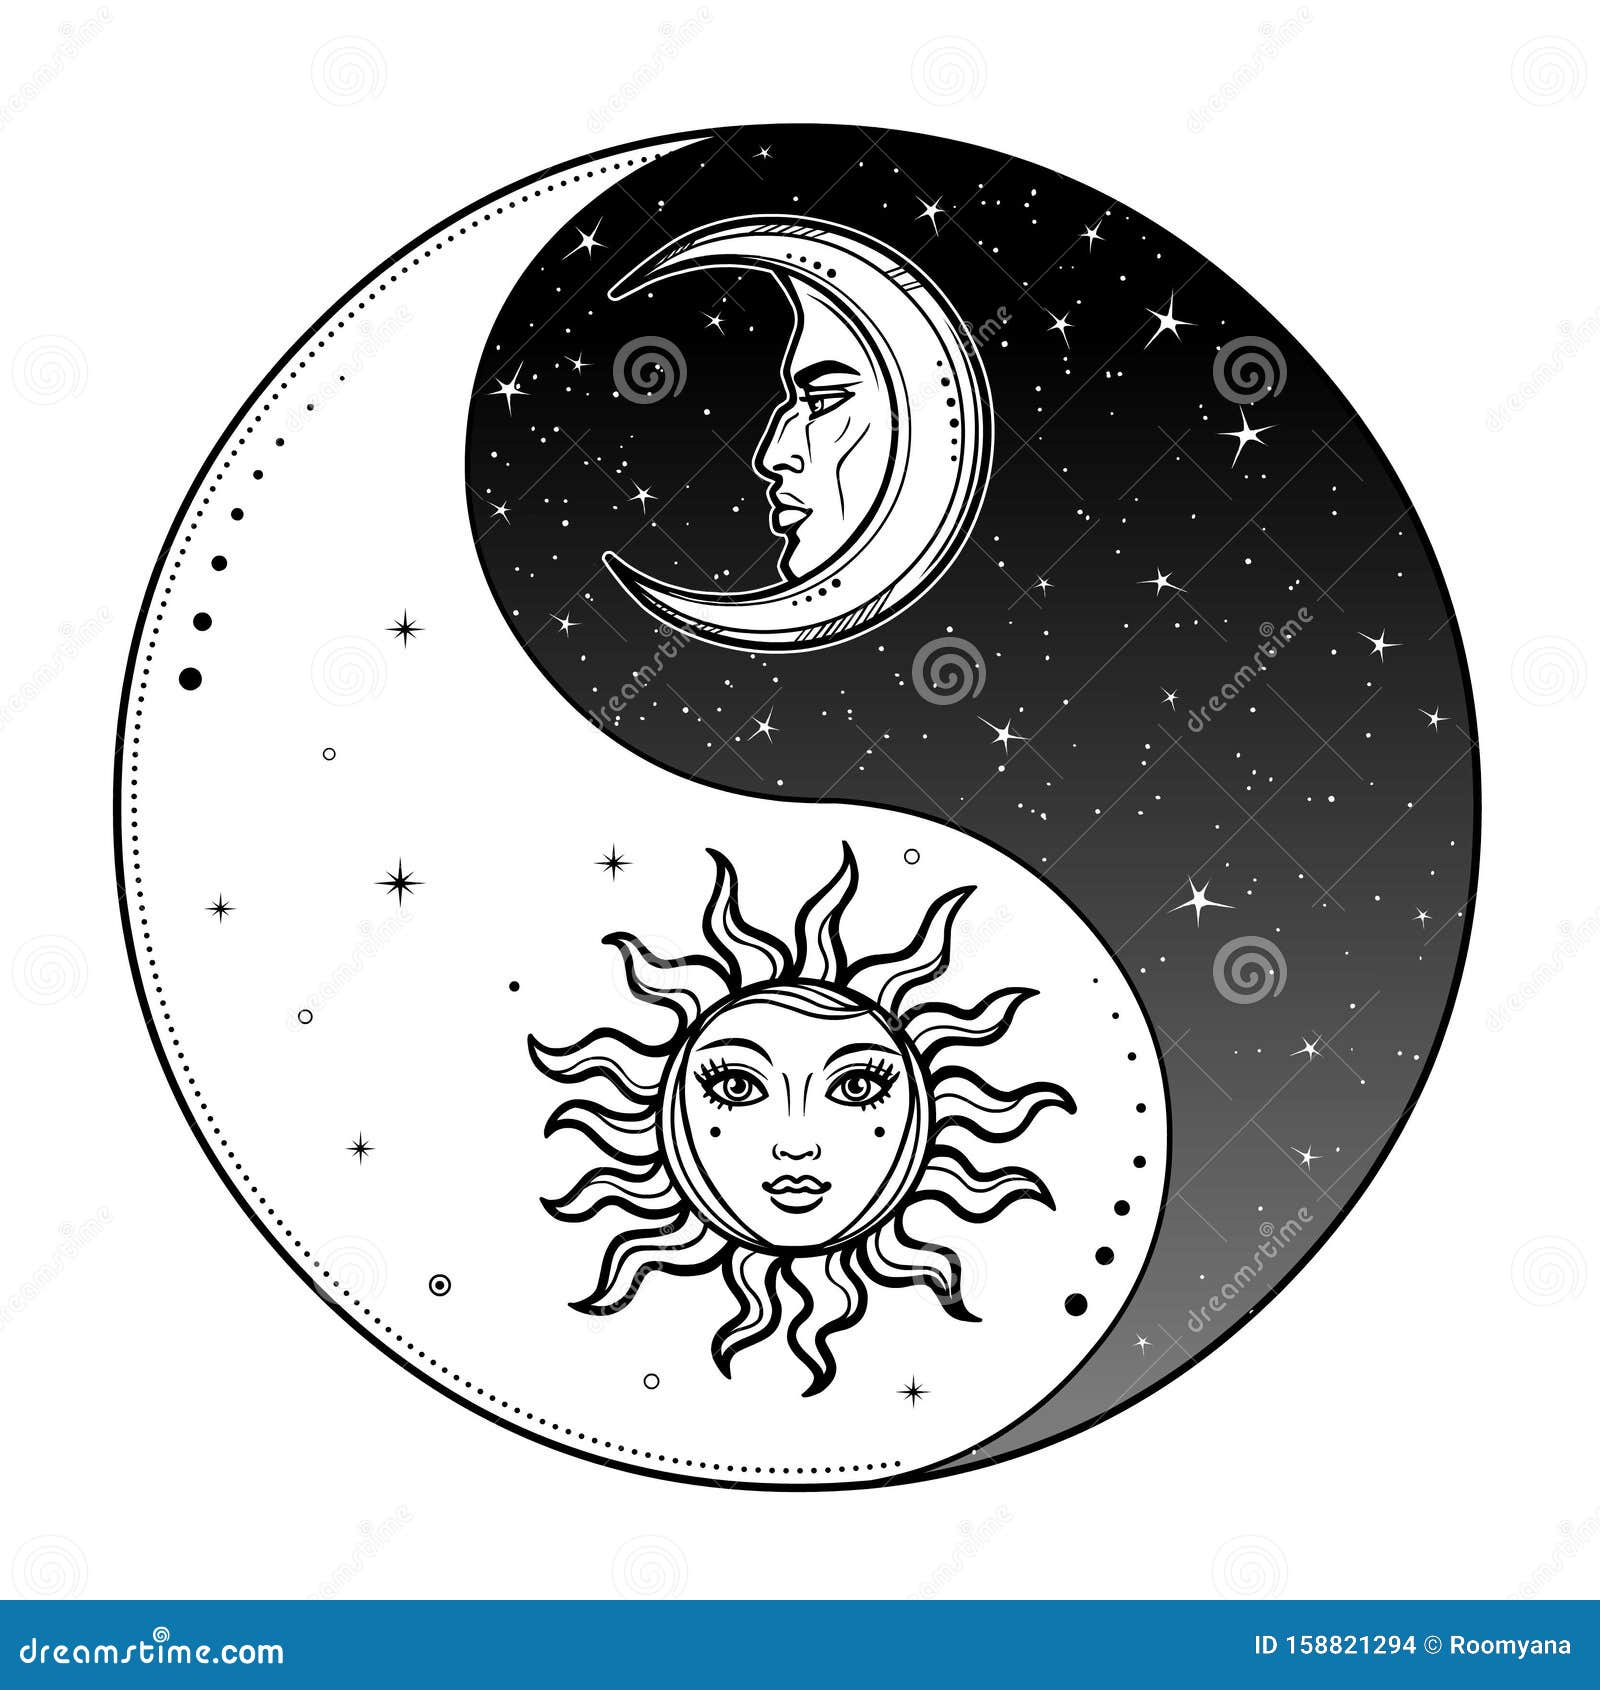 Mystical Drawing Stylized Sun And Moon With Human Face Day And Night Stock Vector Illustration Of Astronomy Geometric